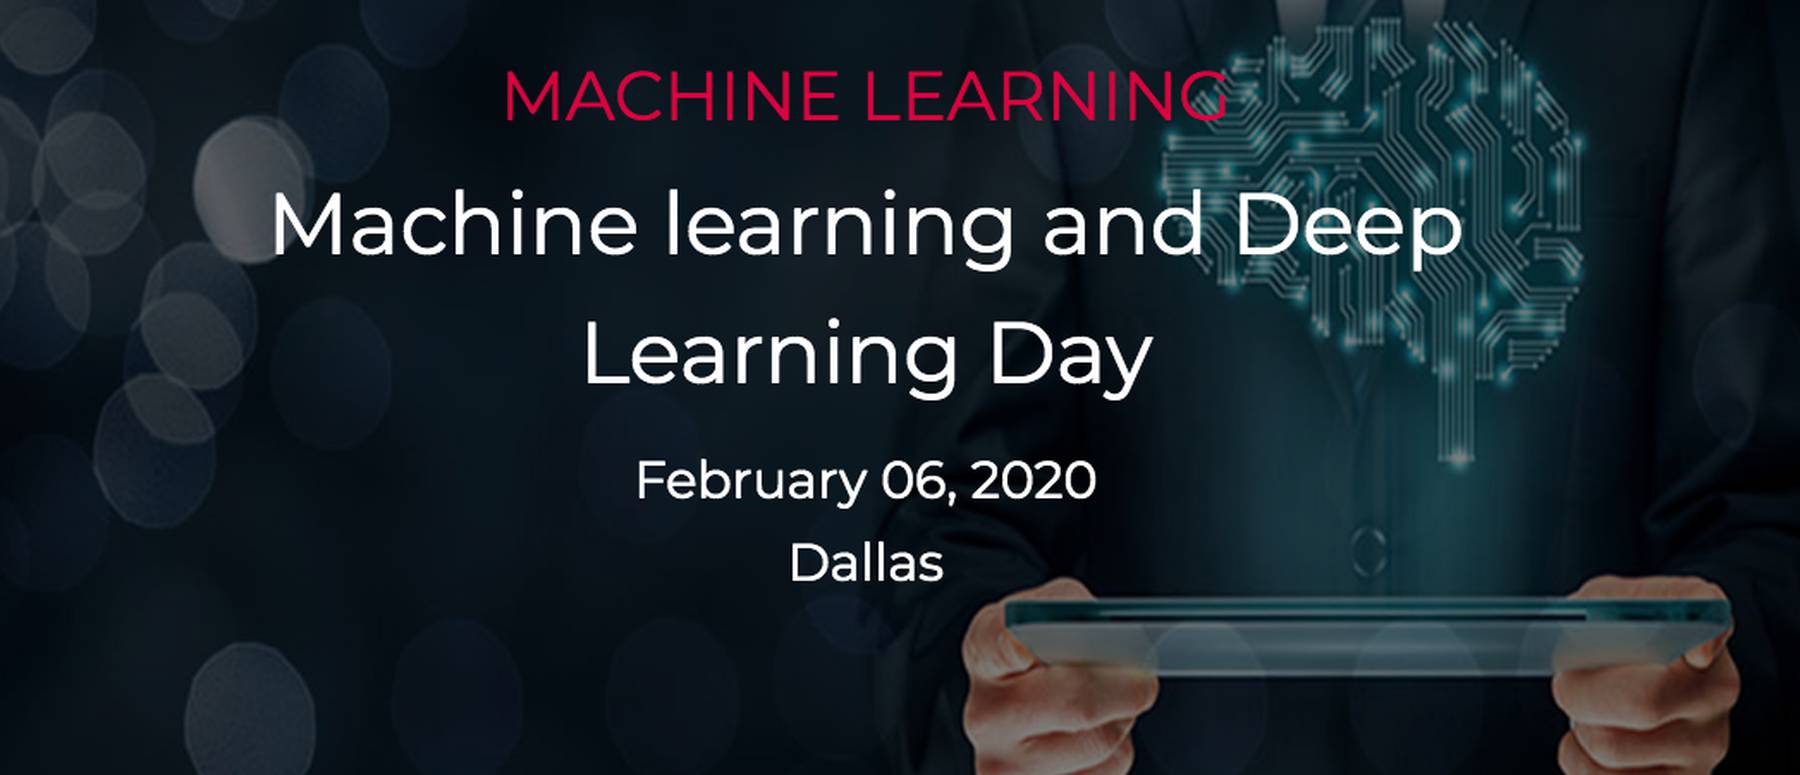 Machine Learning and Deep Learning Day Dallas 2020